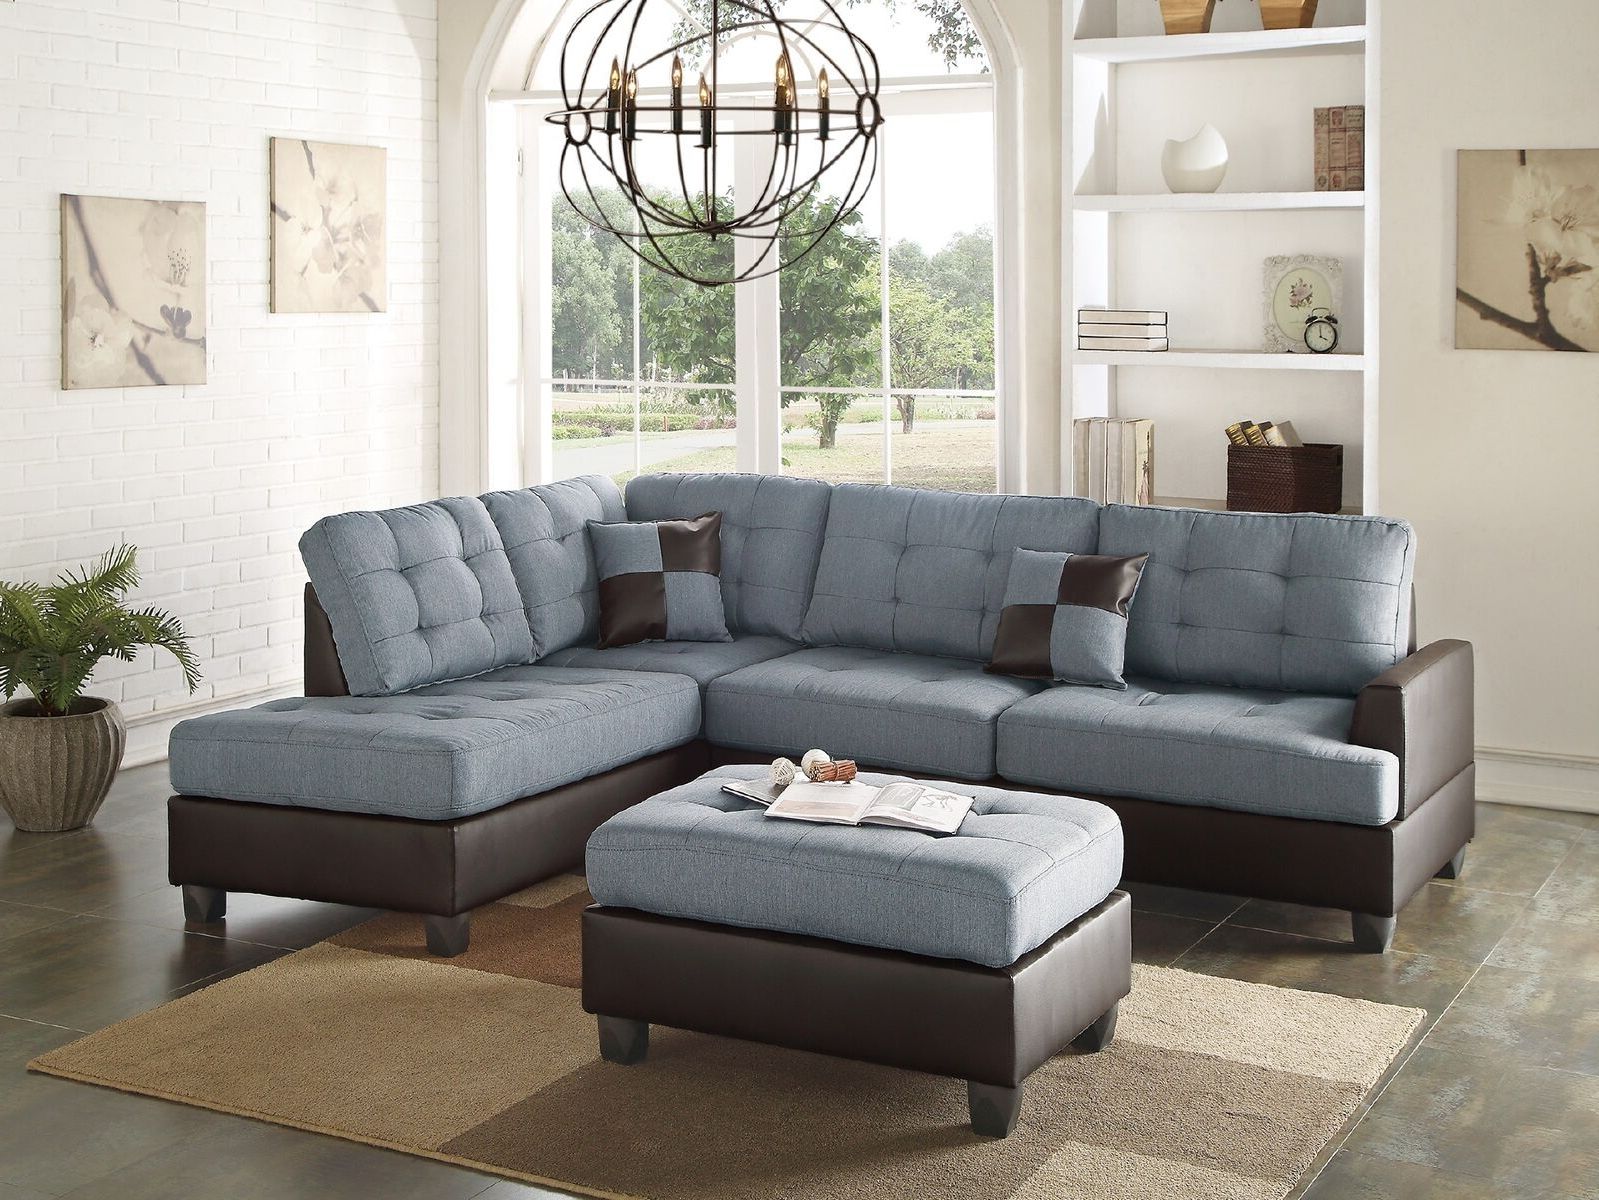 Well Liked Mathew Sectional Sofa Set Contemporary Grey Linen Like Throughout Ludovic Contemporary Sofas Light Gray (View 1 of 20)